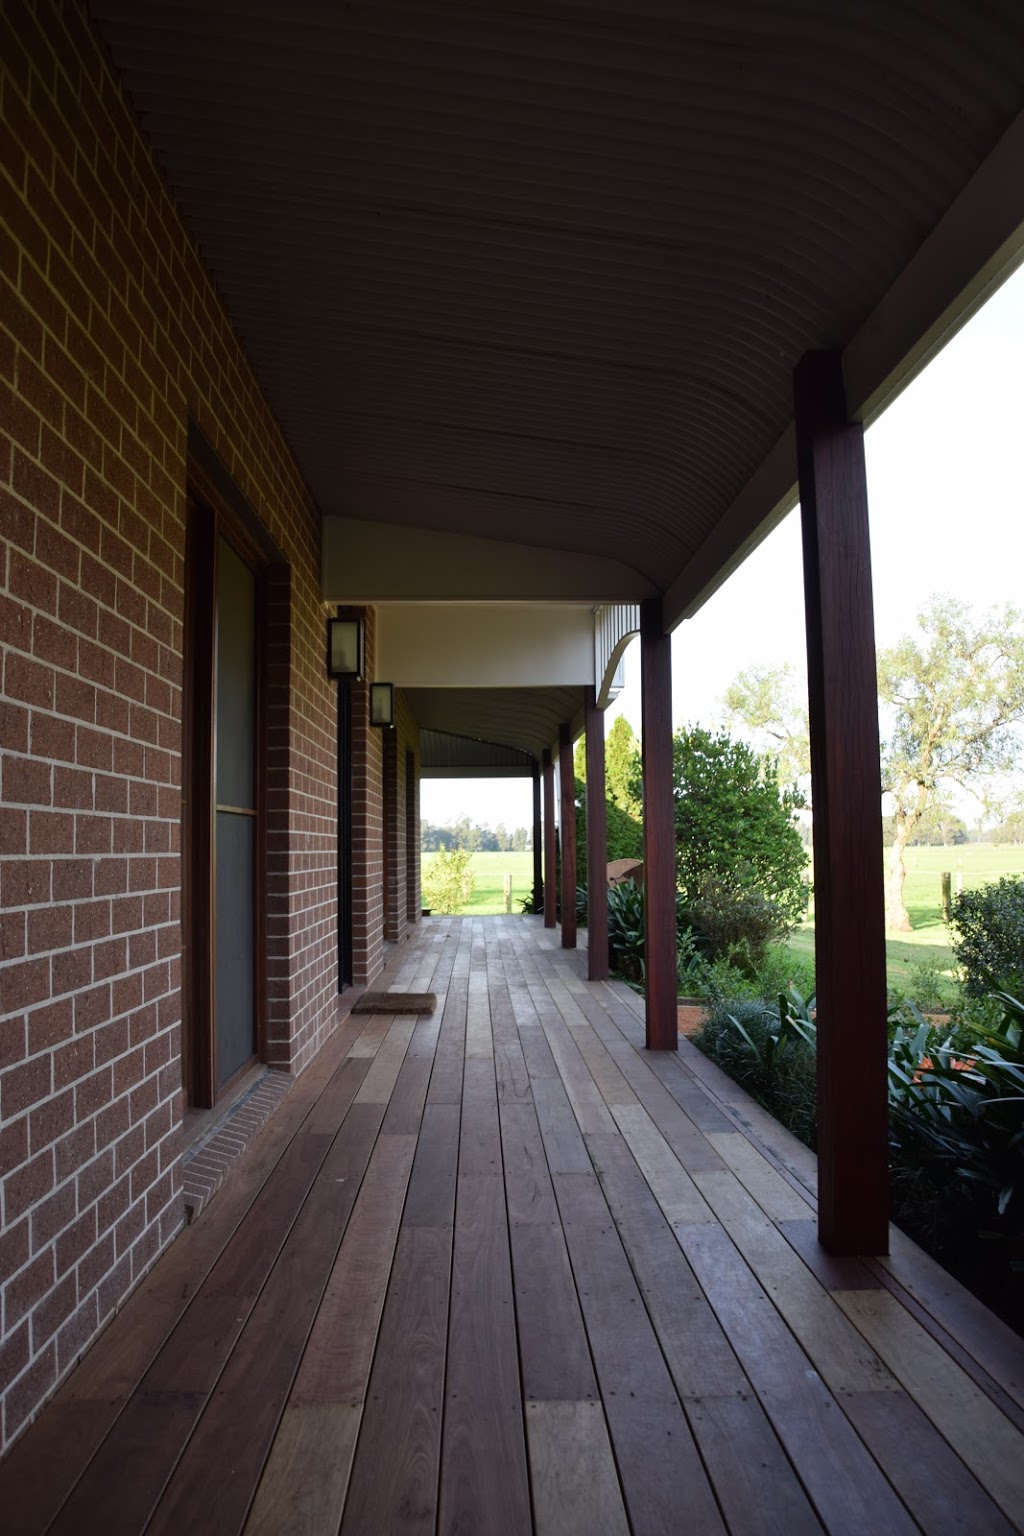 The Willows BnB | lodging | 58 Ryans Ln, Pyree NSW 2540, Australia | 0400221135 OR +61 400 221 135